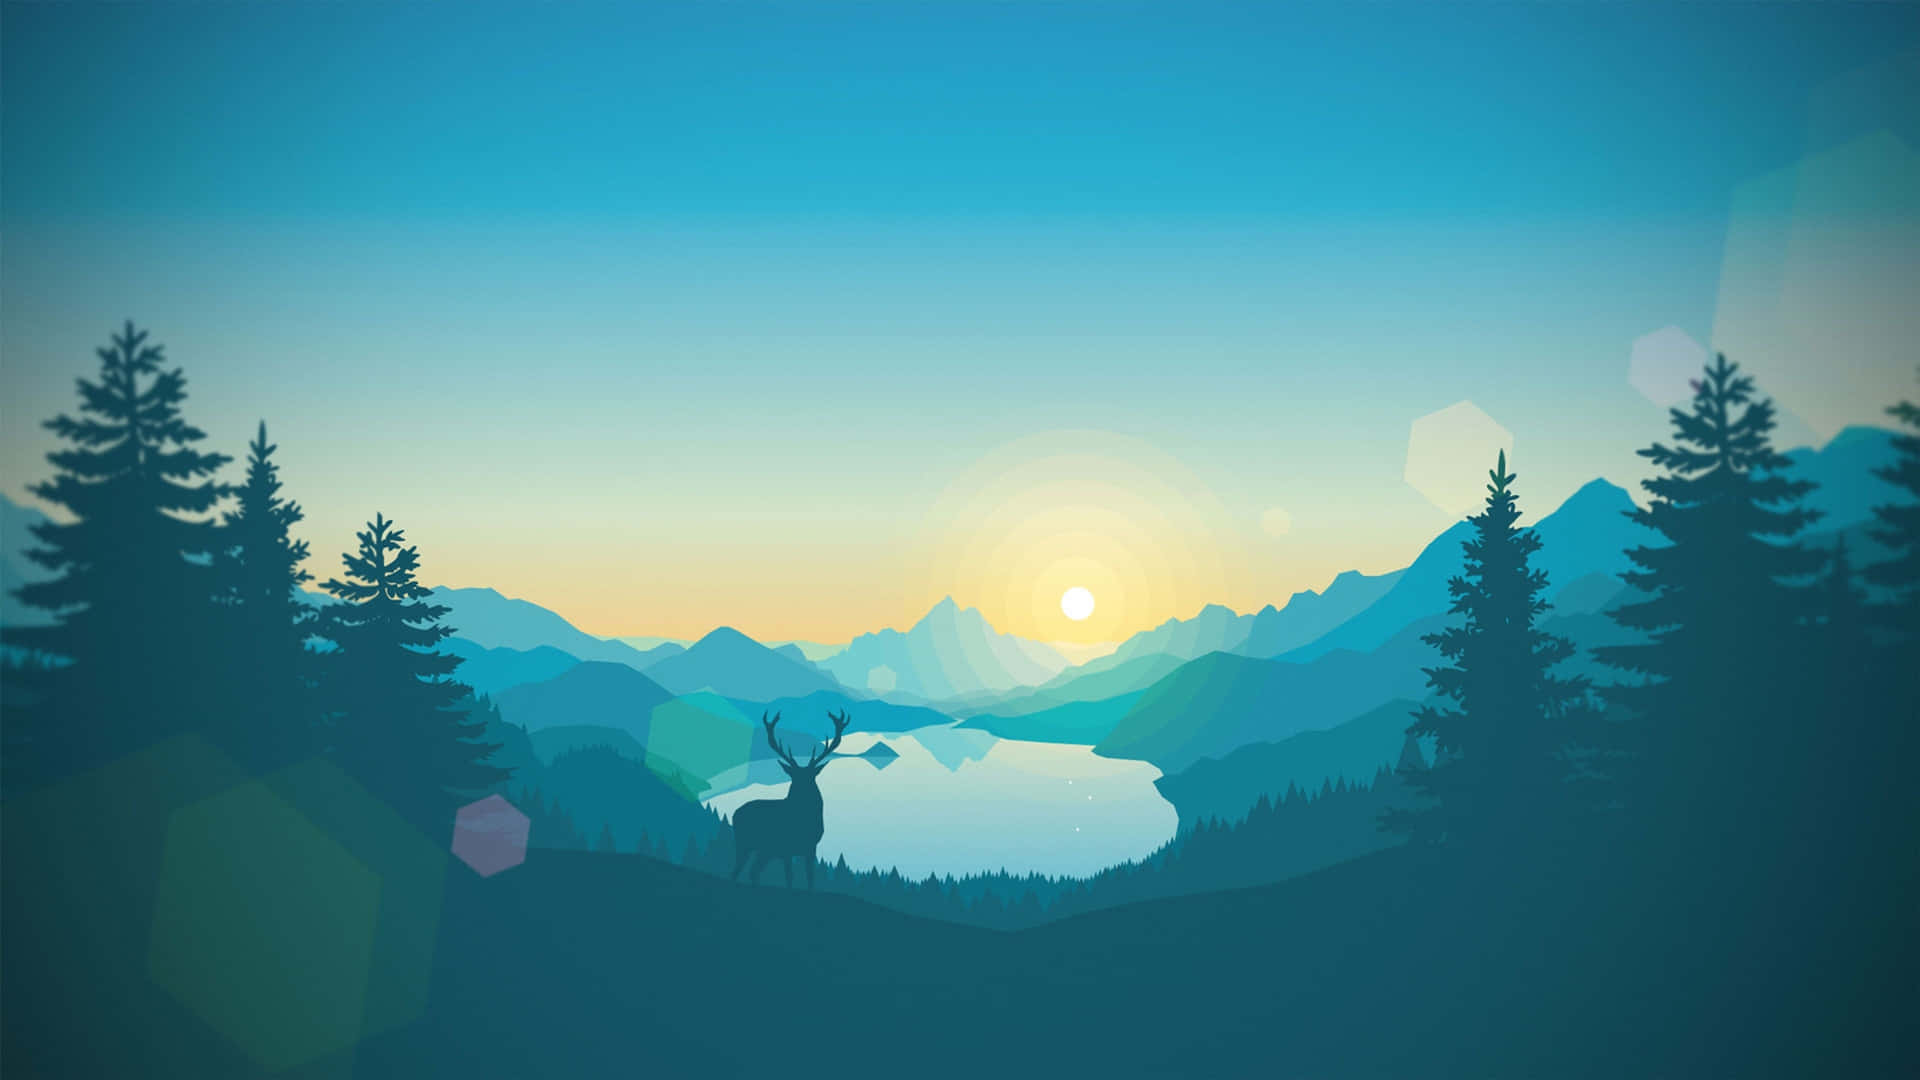 A Deer In The Mountains At Sunset